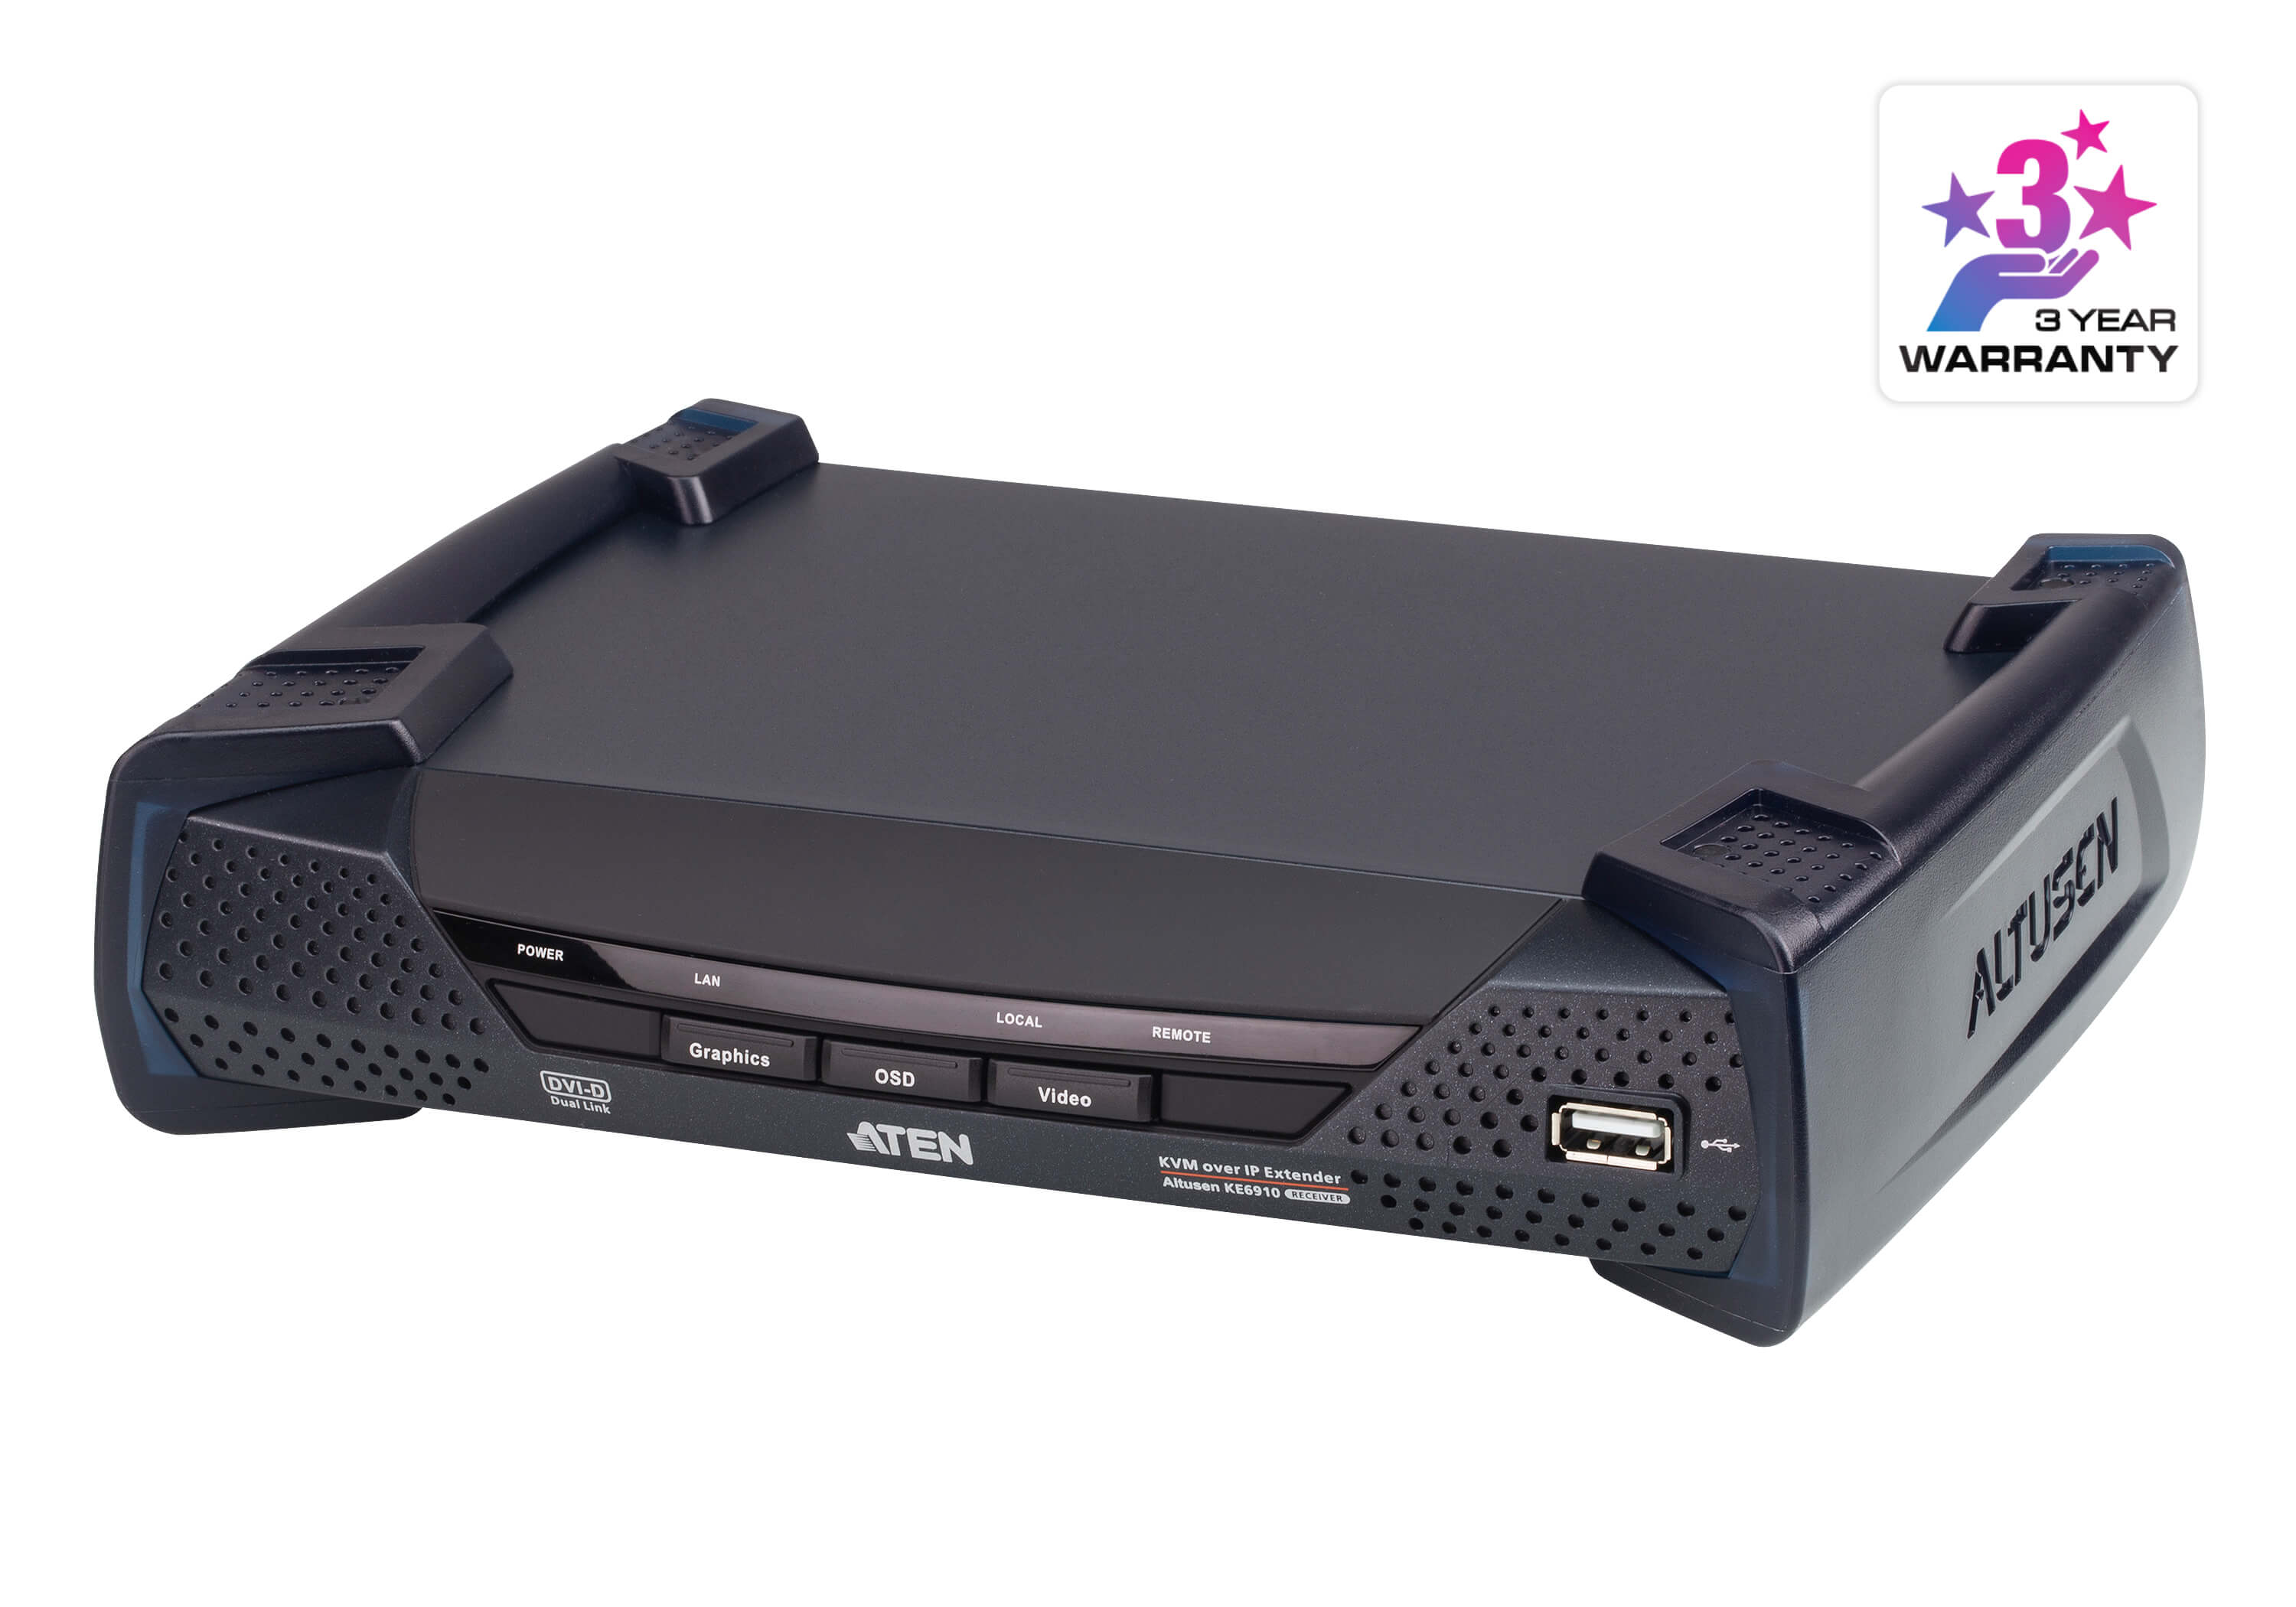 Aten DVI Dual Link KVM over IP Transmitter with Dual DC Power, supports up to 2560 x 1600 @ 60 Hz, USB and 3.5mm Audio input and Output